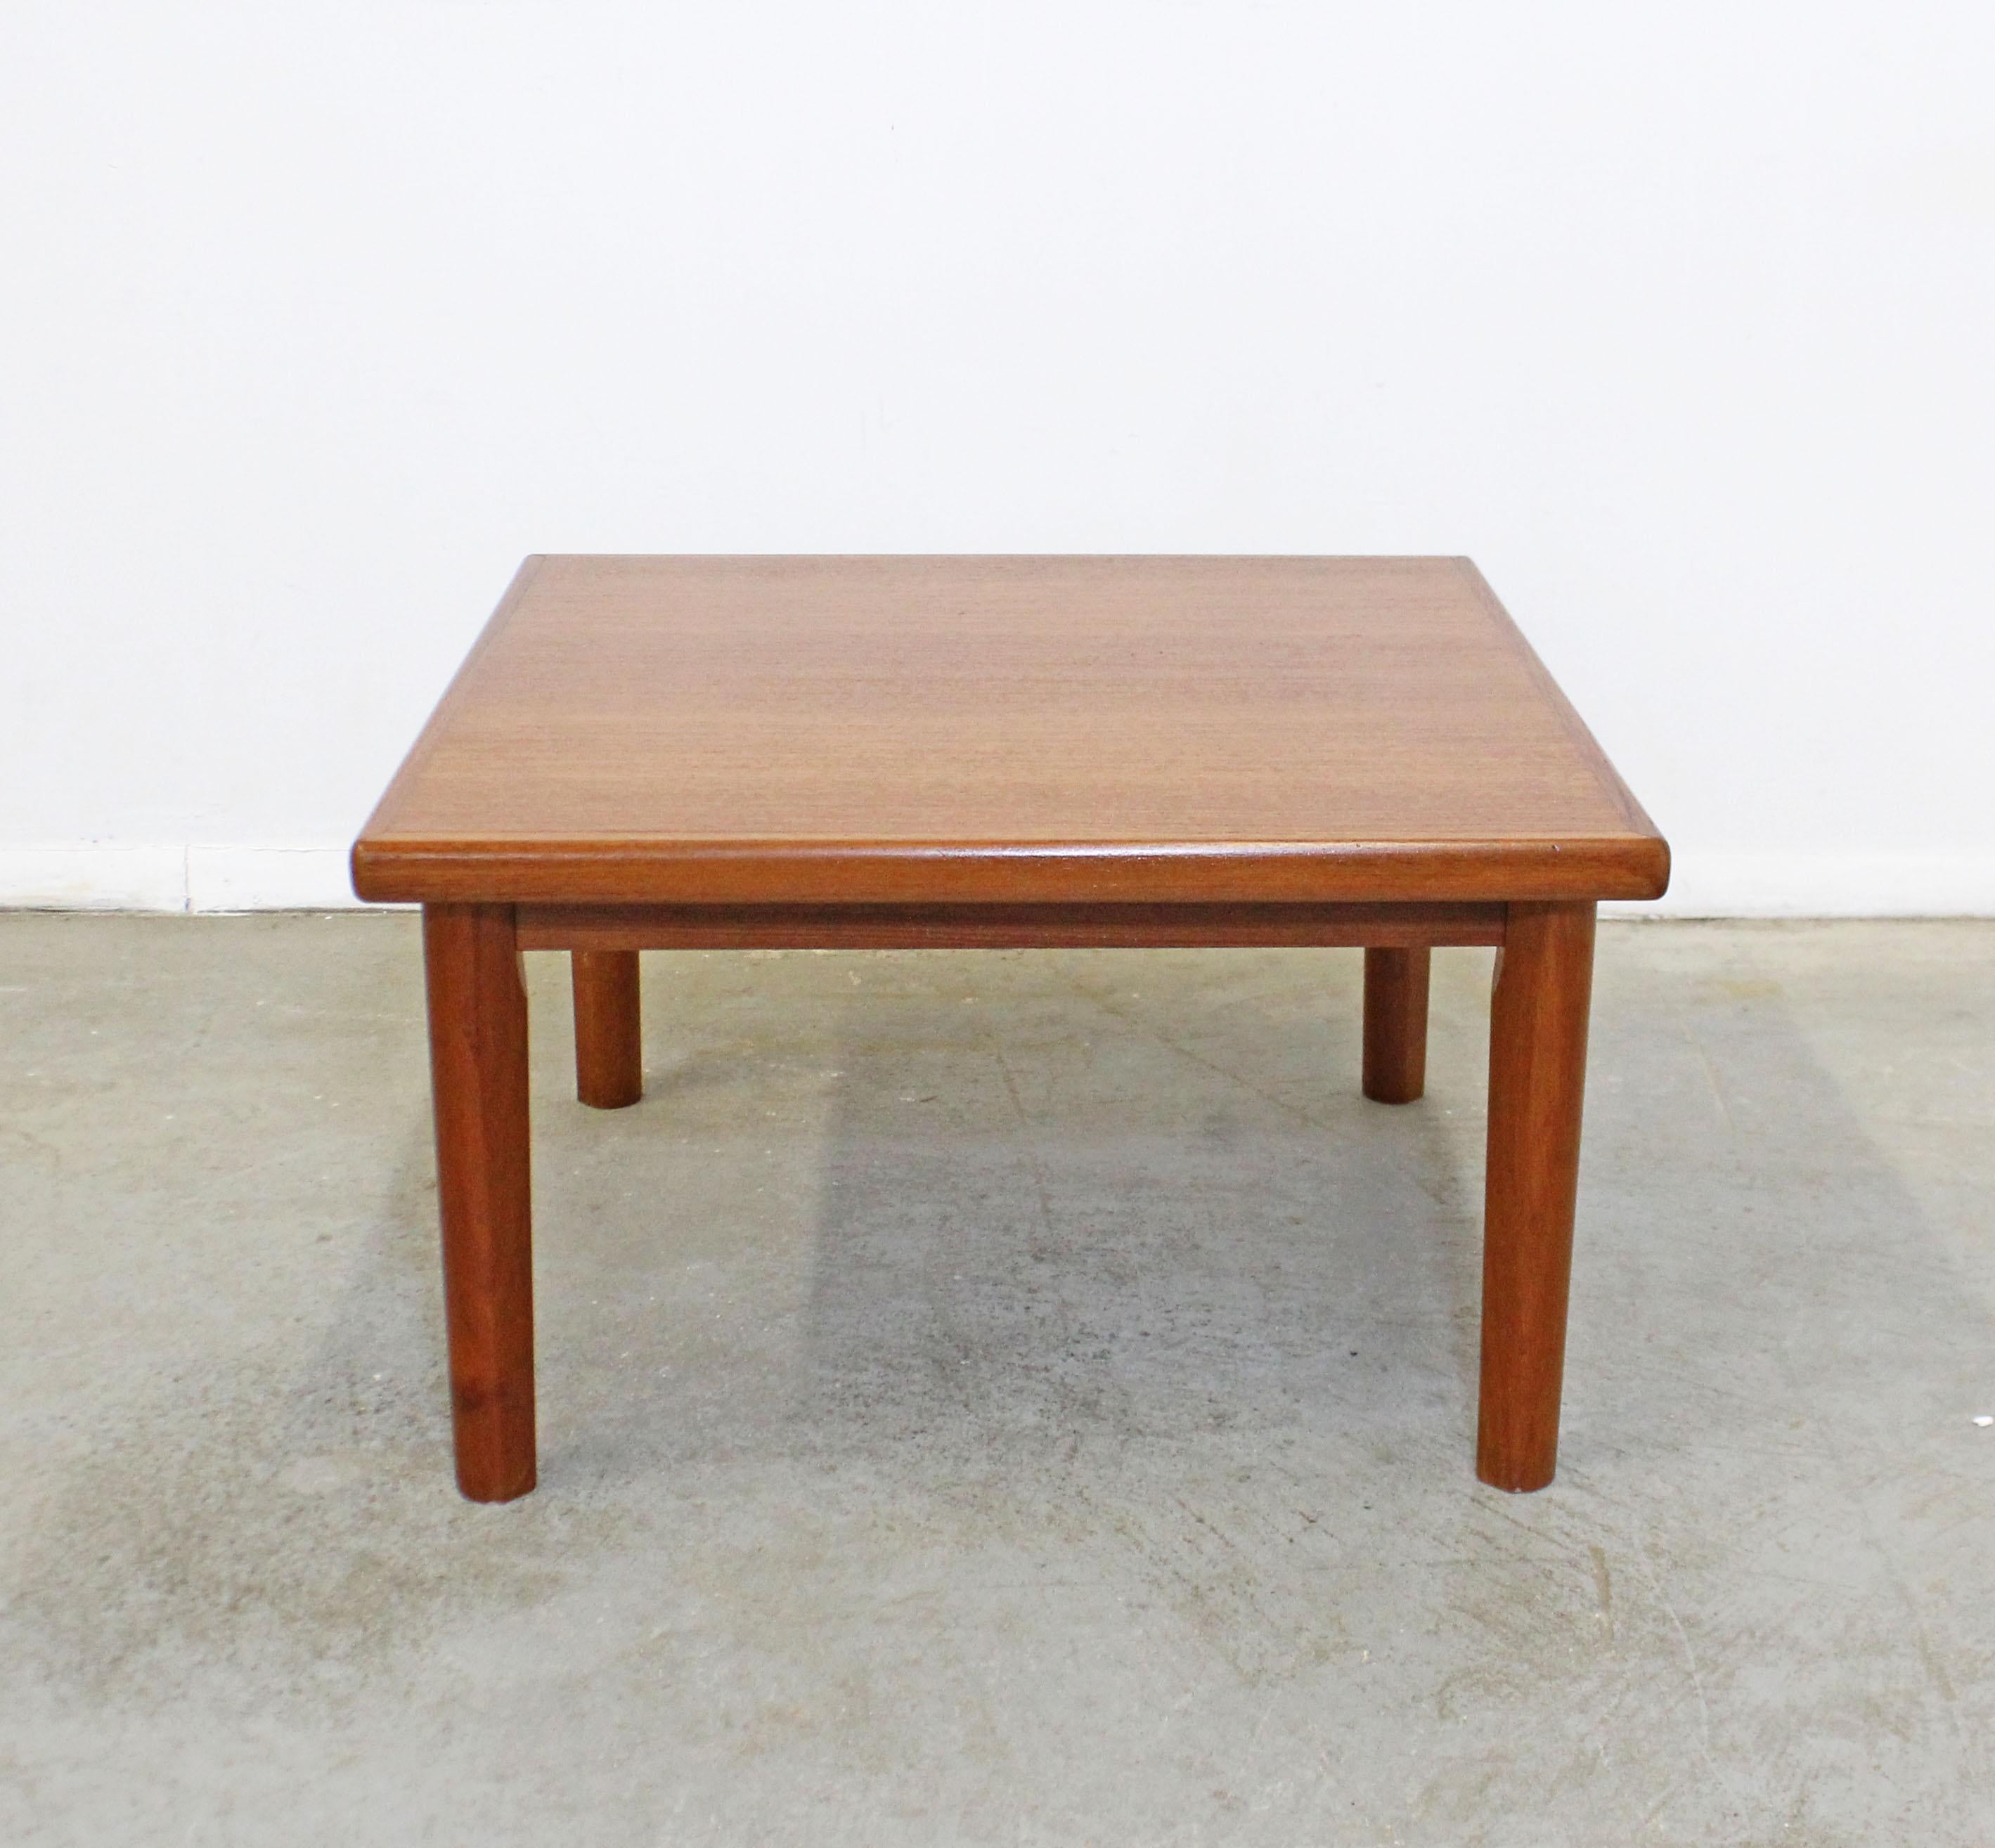 What a find. Offered is a Danish modern table with a square top by BRDR Furbo. Can be used as a coffee or side table. It is in very good condition, showing minimal age wear with slight surface scratches on the top. Please review pictures and